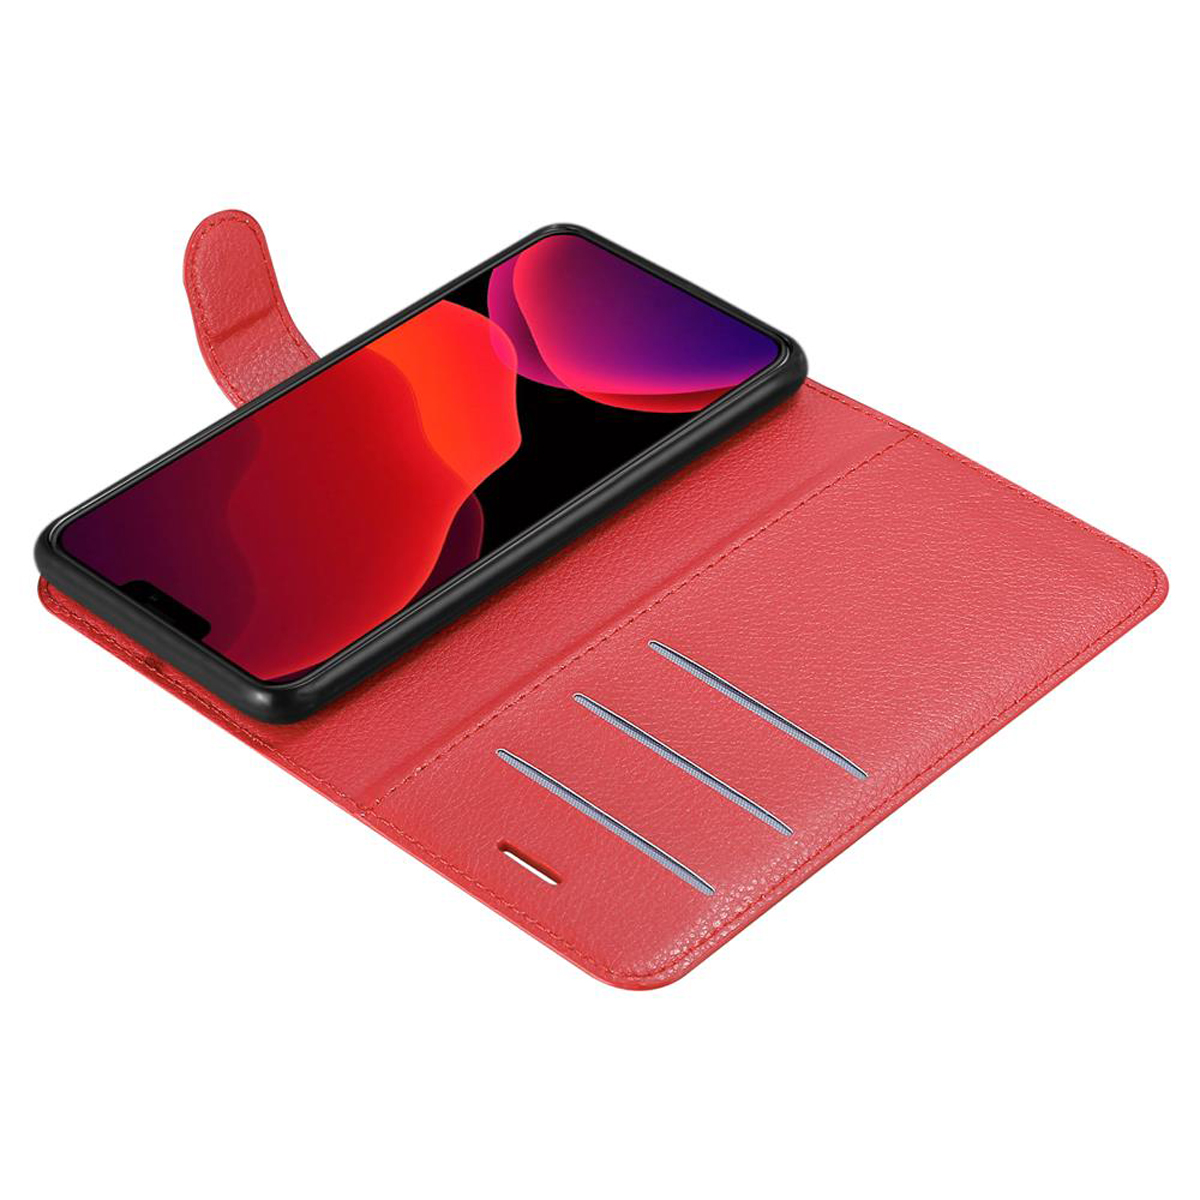 MAX, KARMIN PRO ROT Apple, Book Bookcover, CADORABO 12 Hülle iPhone Standfunktion,